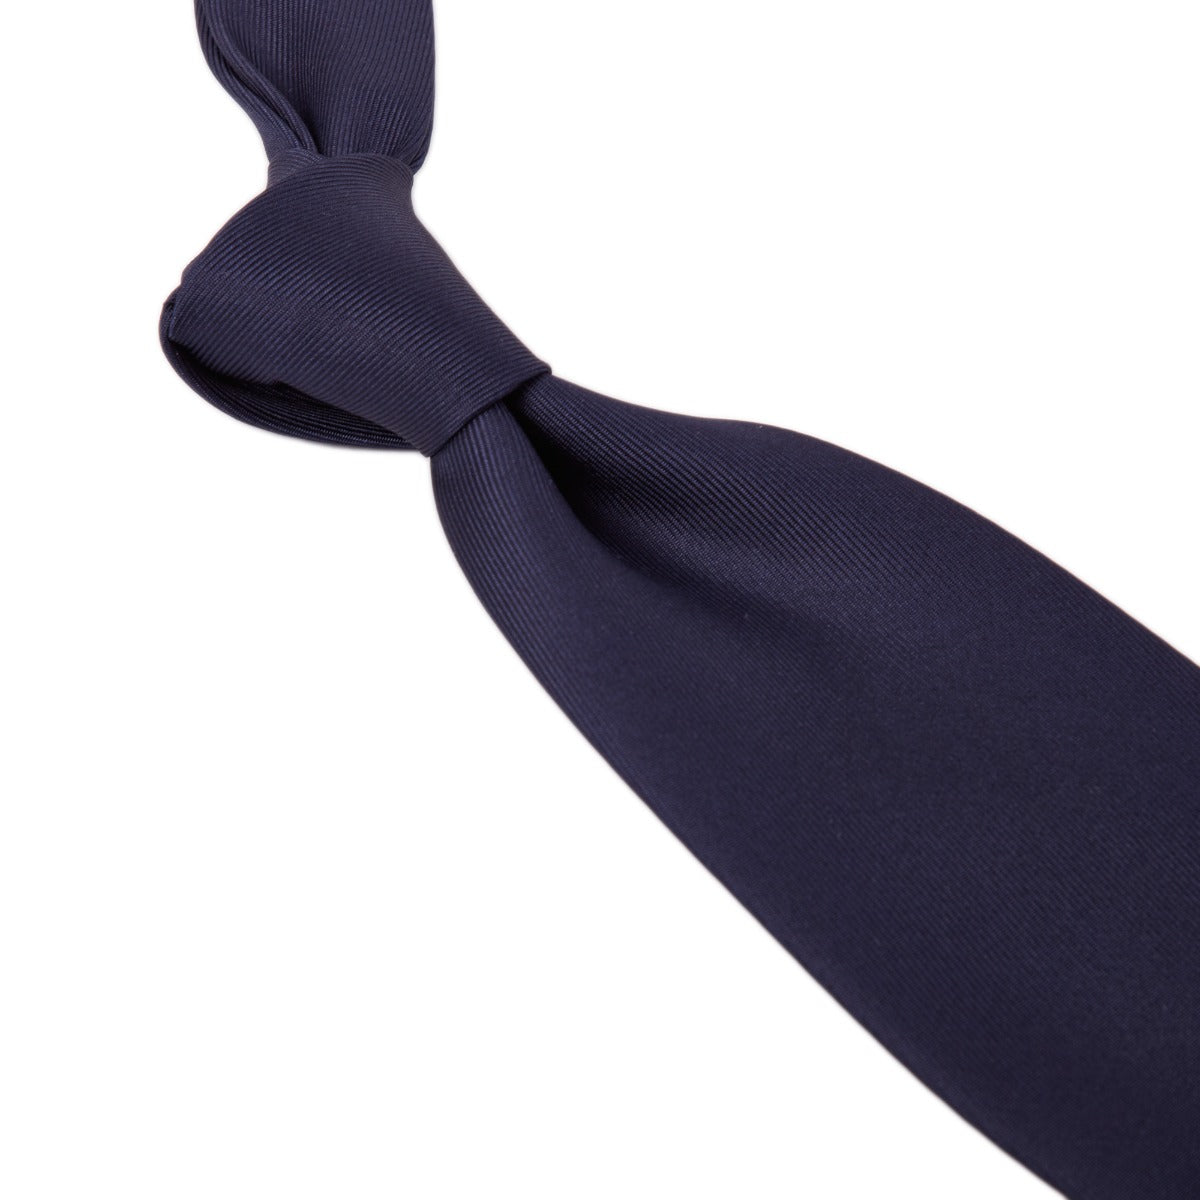 A Sovereign Grade 50oz Navy Horizontal Solid Twill Silk Tie with a white background from KirbyAllison.com.